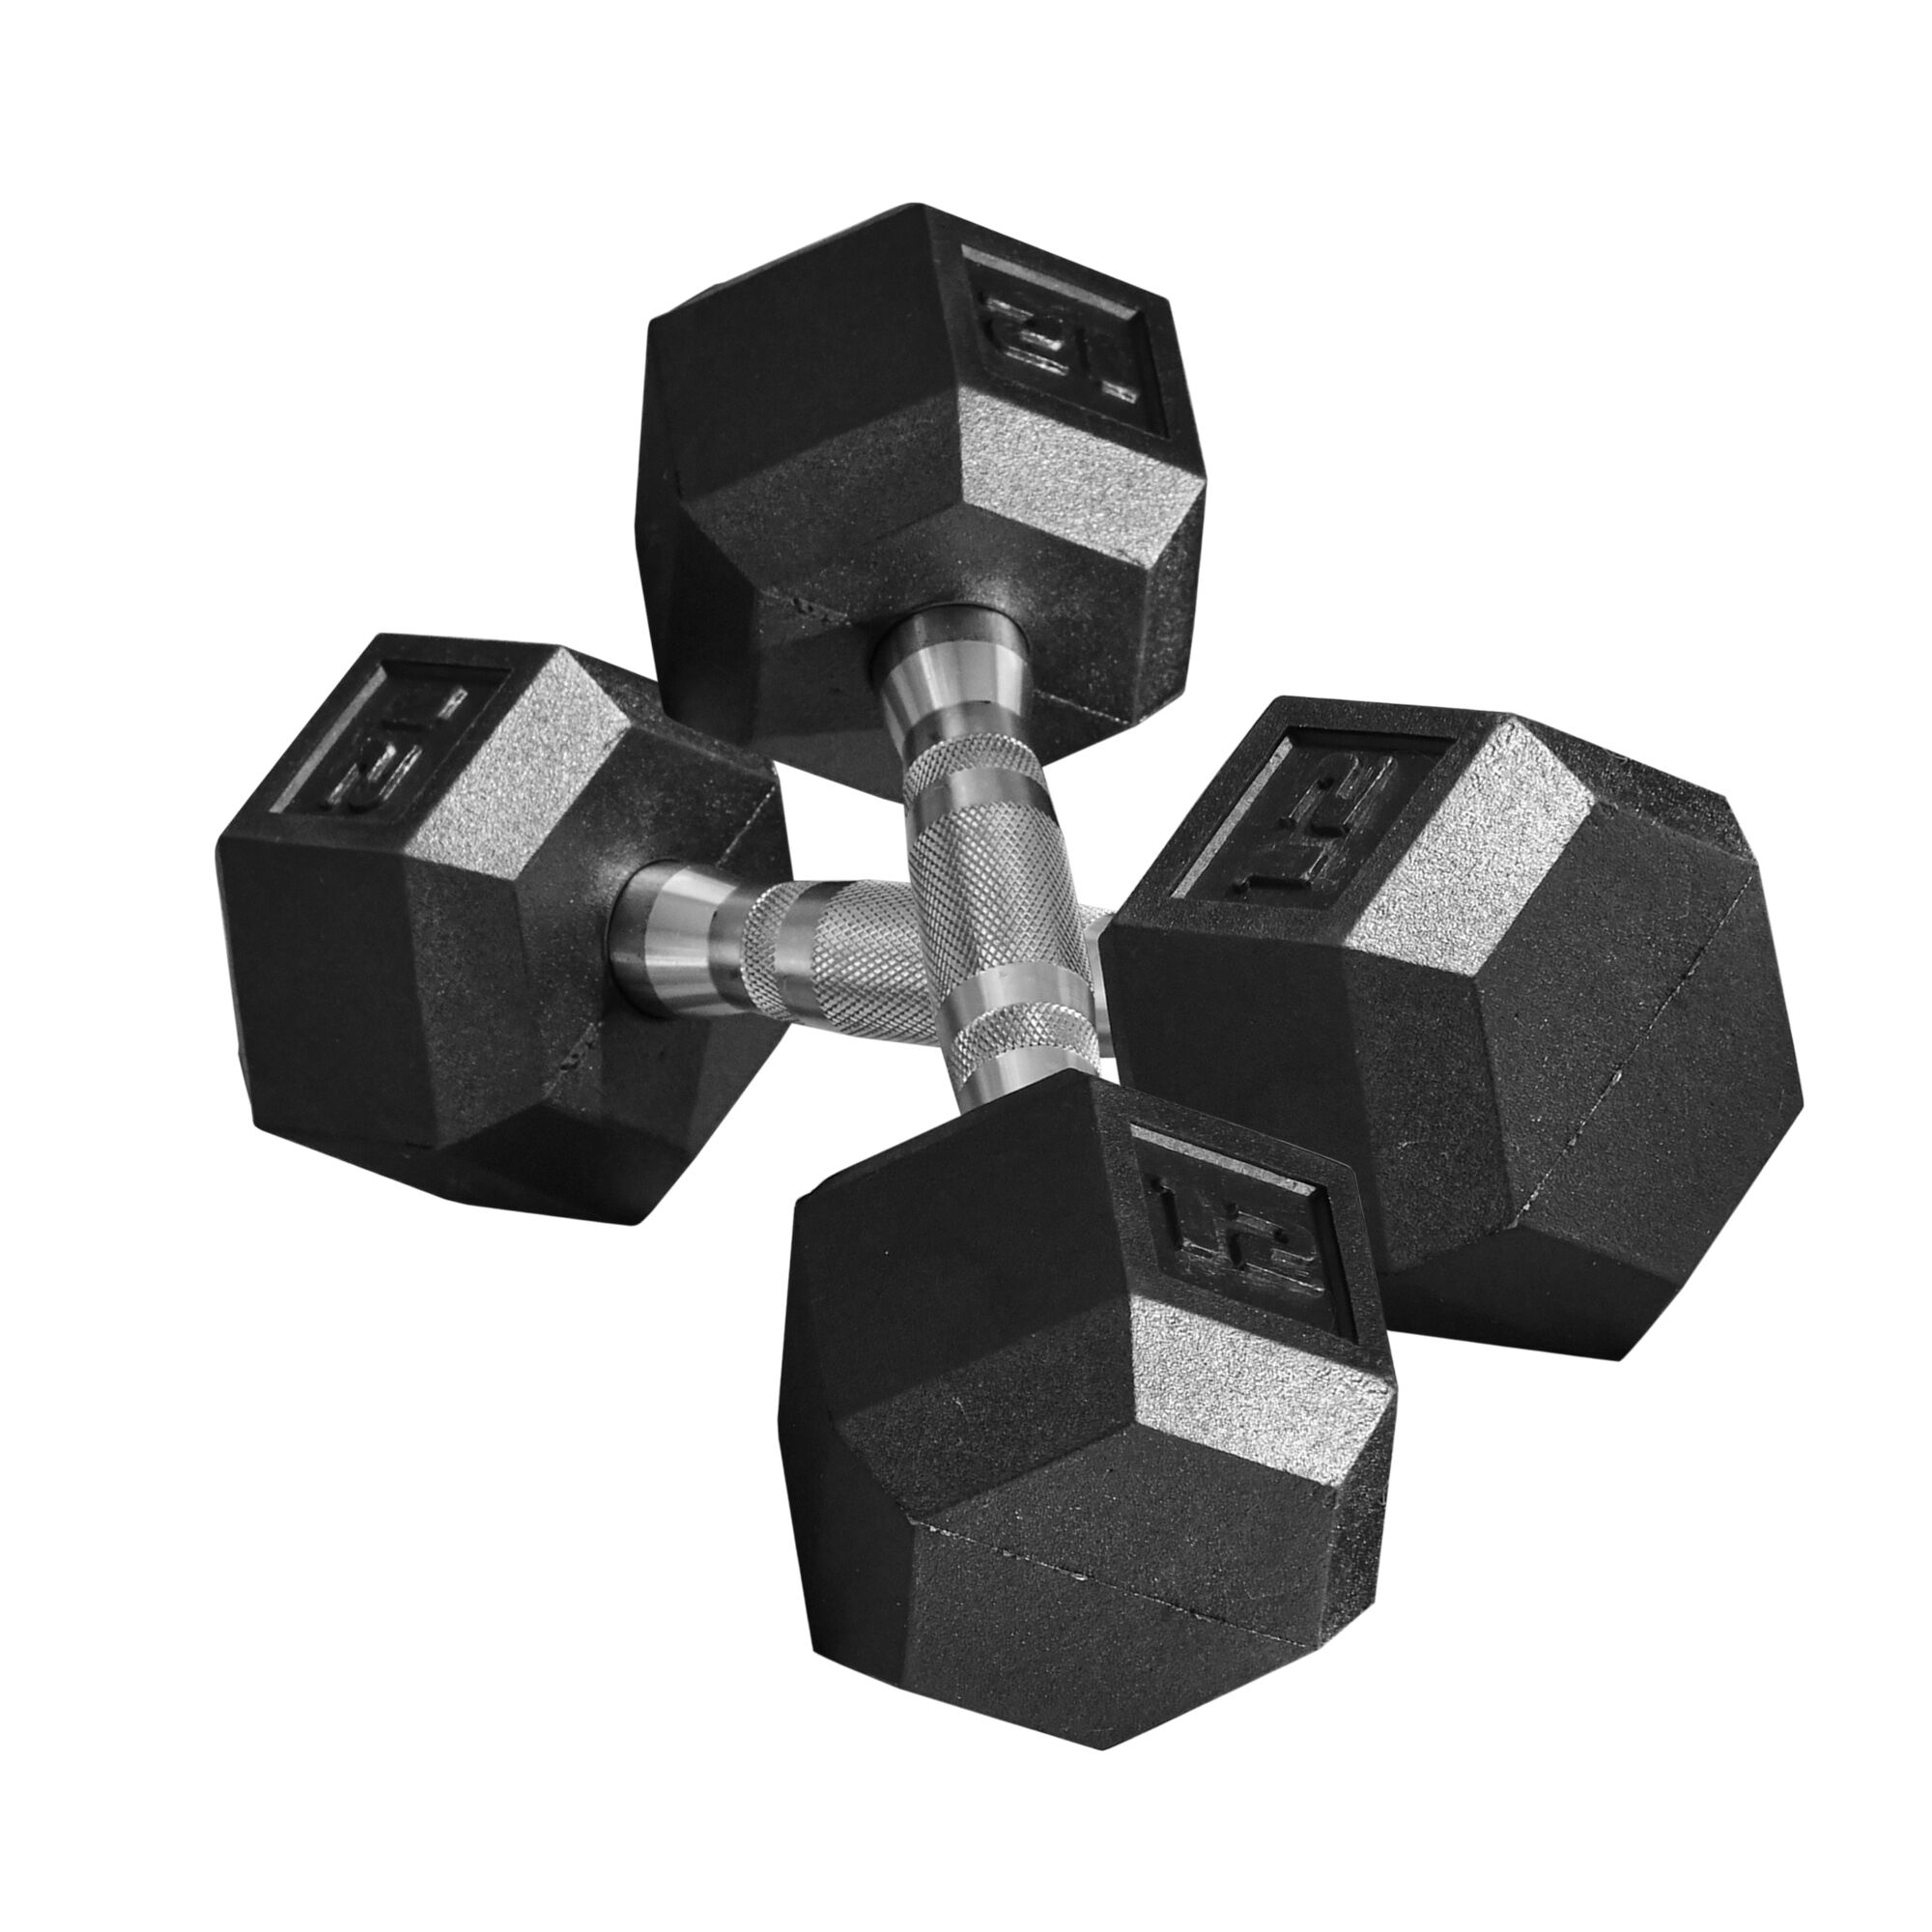 Soozier Rubber Dumbbell Weight Set 24lbs 12lbs Single Dumbbell Hand Weight Barbell Body Fitness Training for Home Office Gym Black   Aosom.com